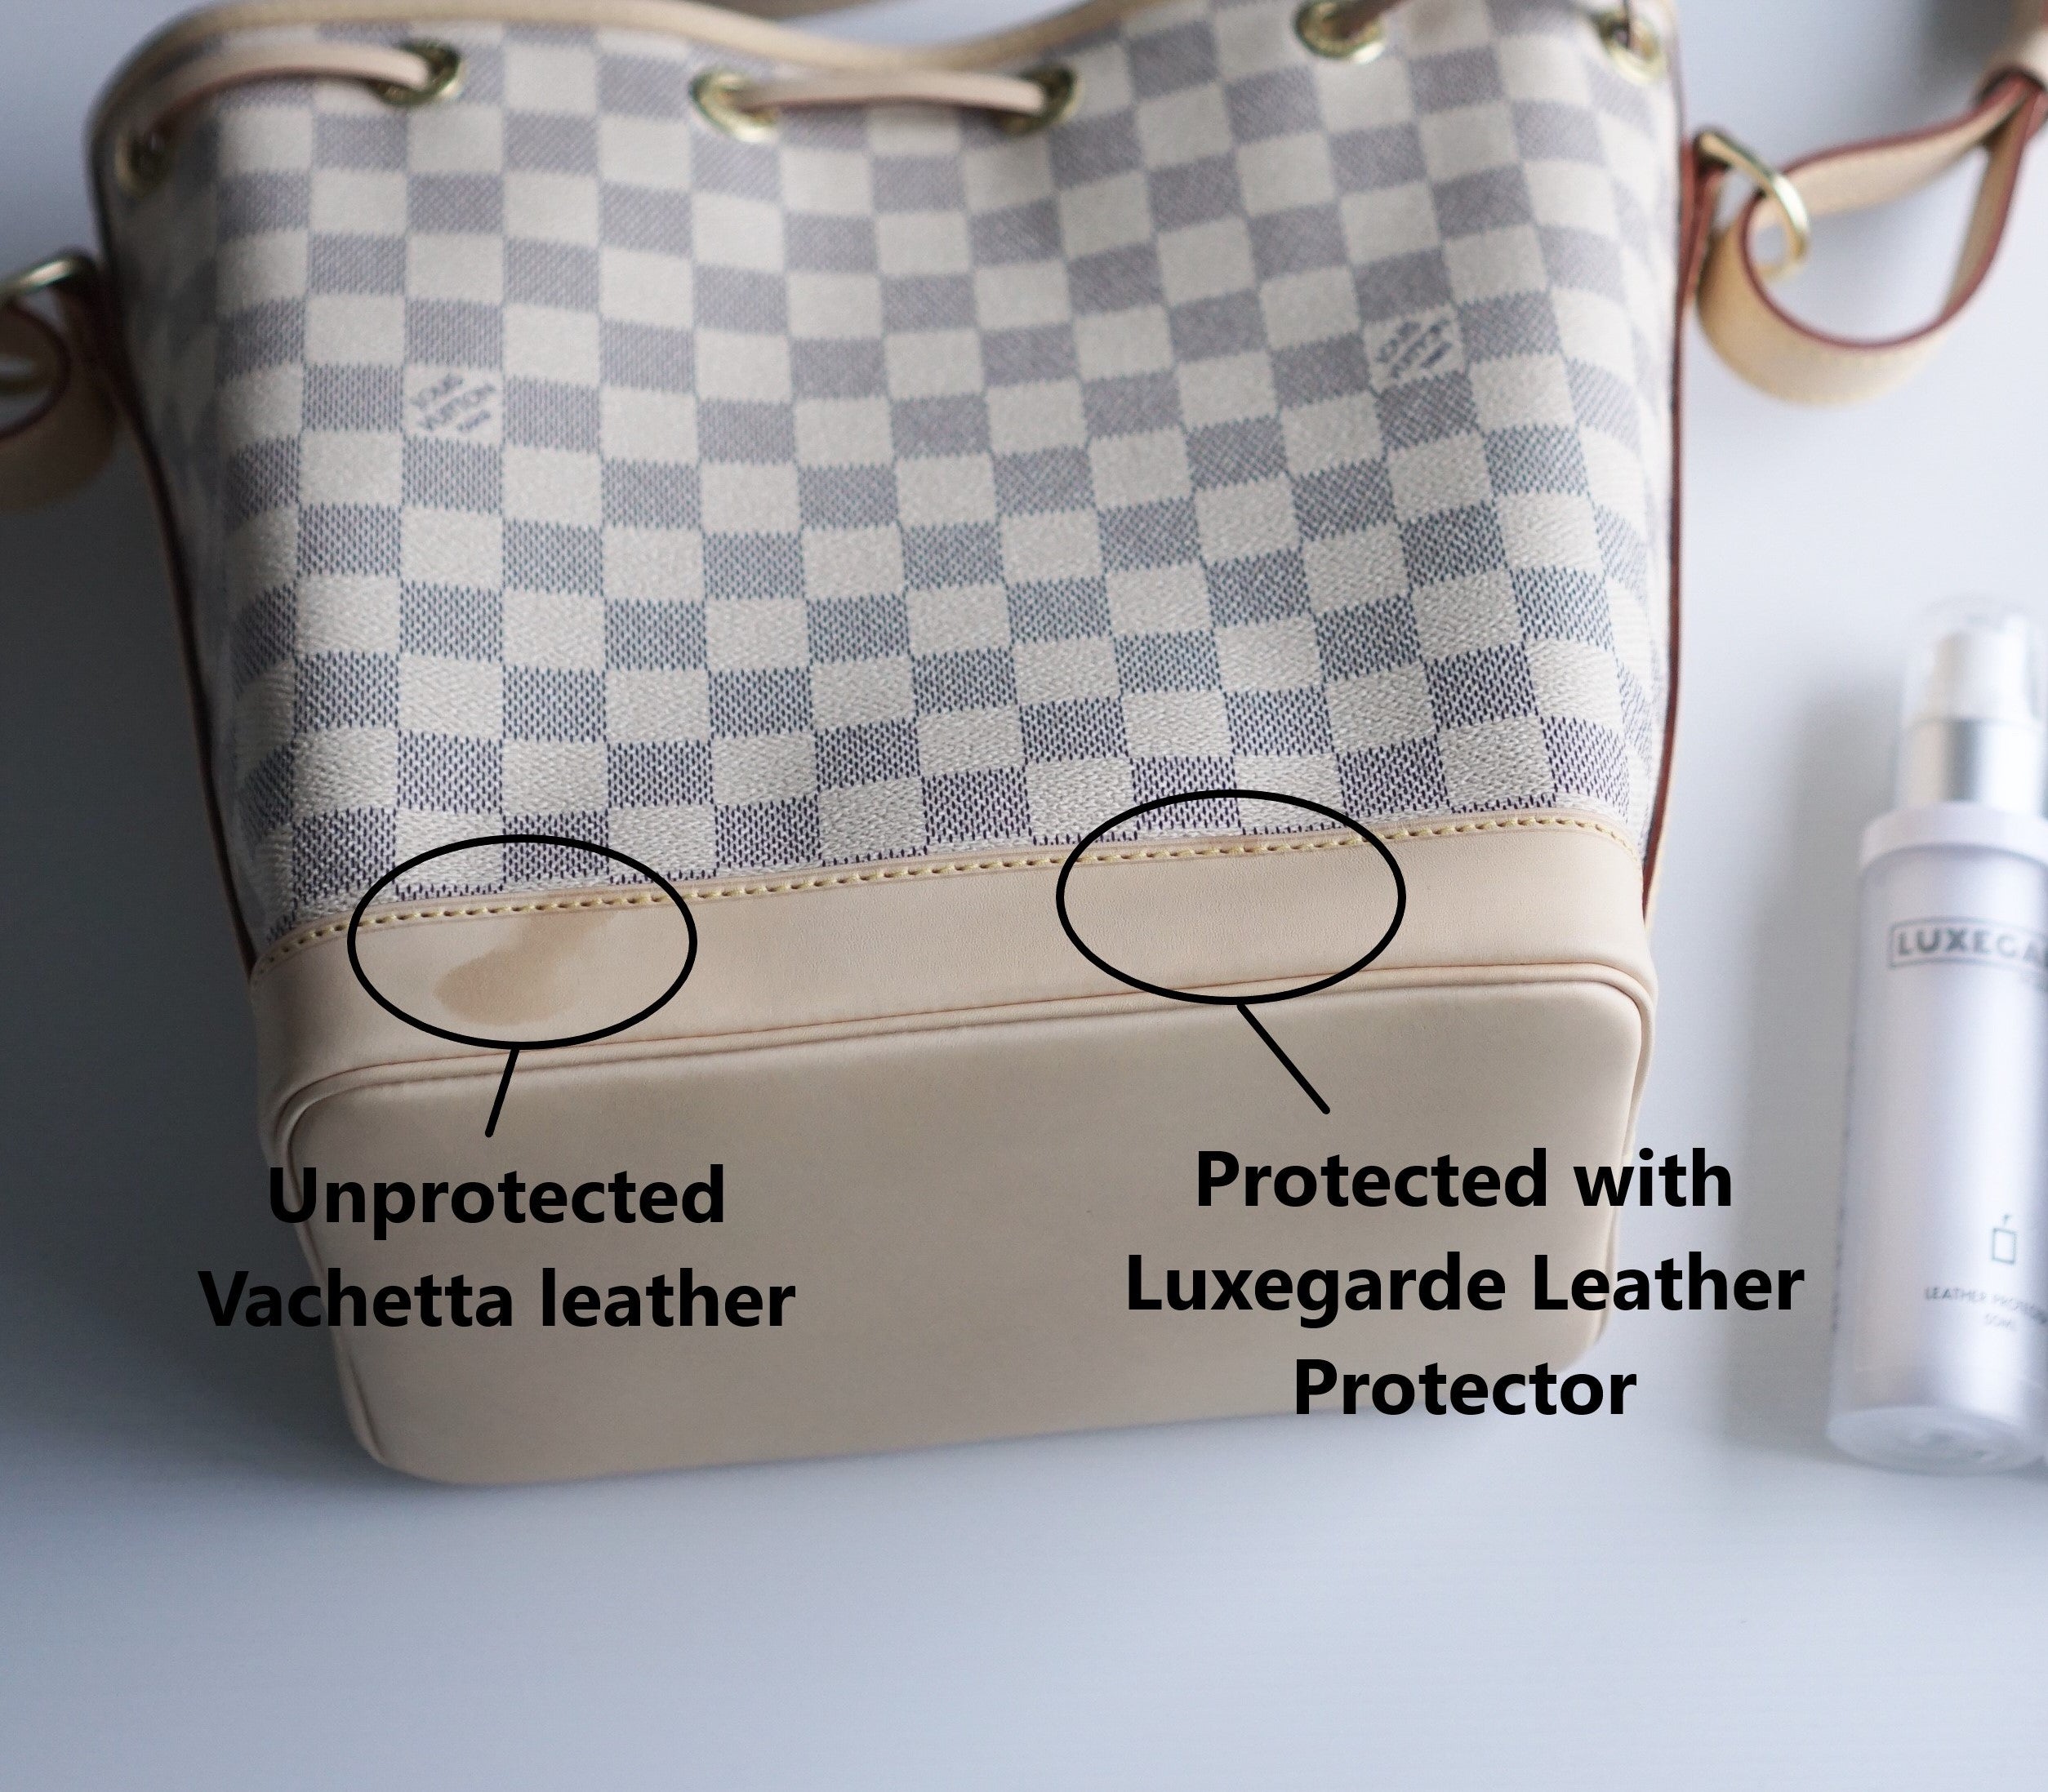 Louis Vuitton Handbags: How to Simple-Wrap Handles to Protect